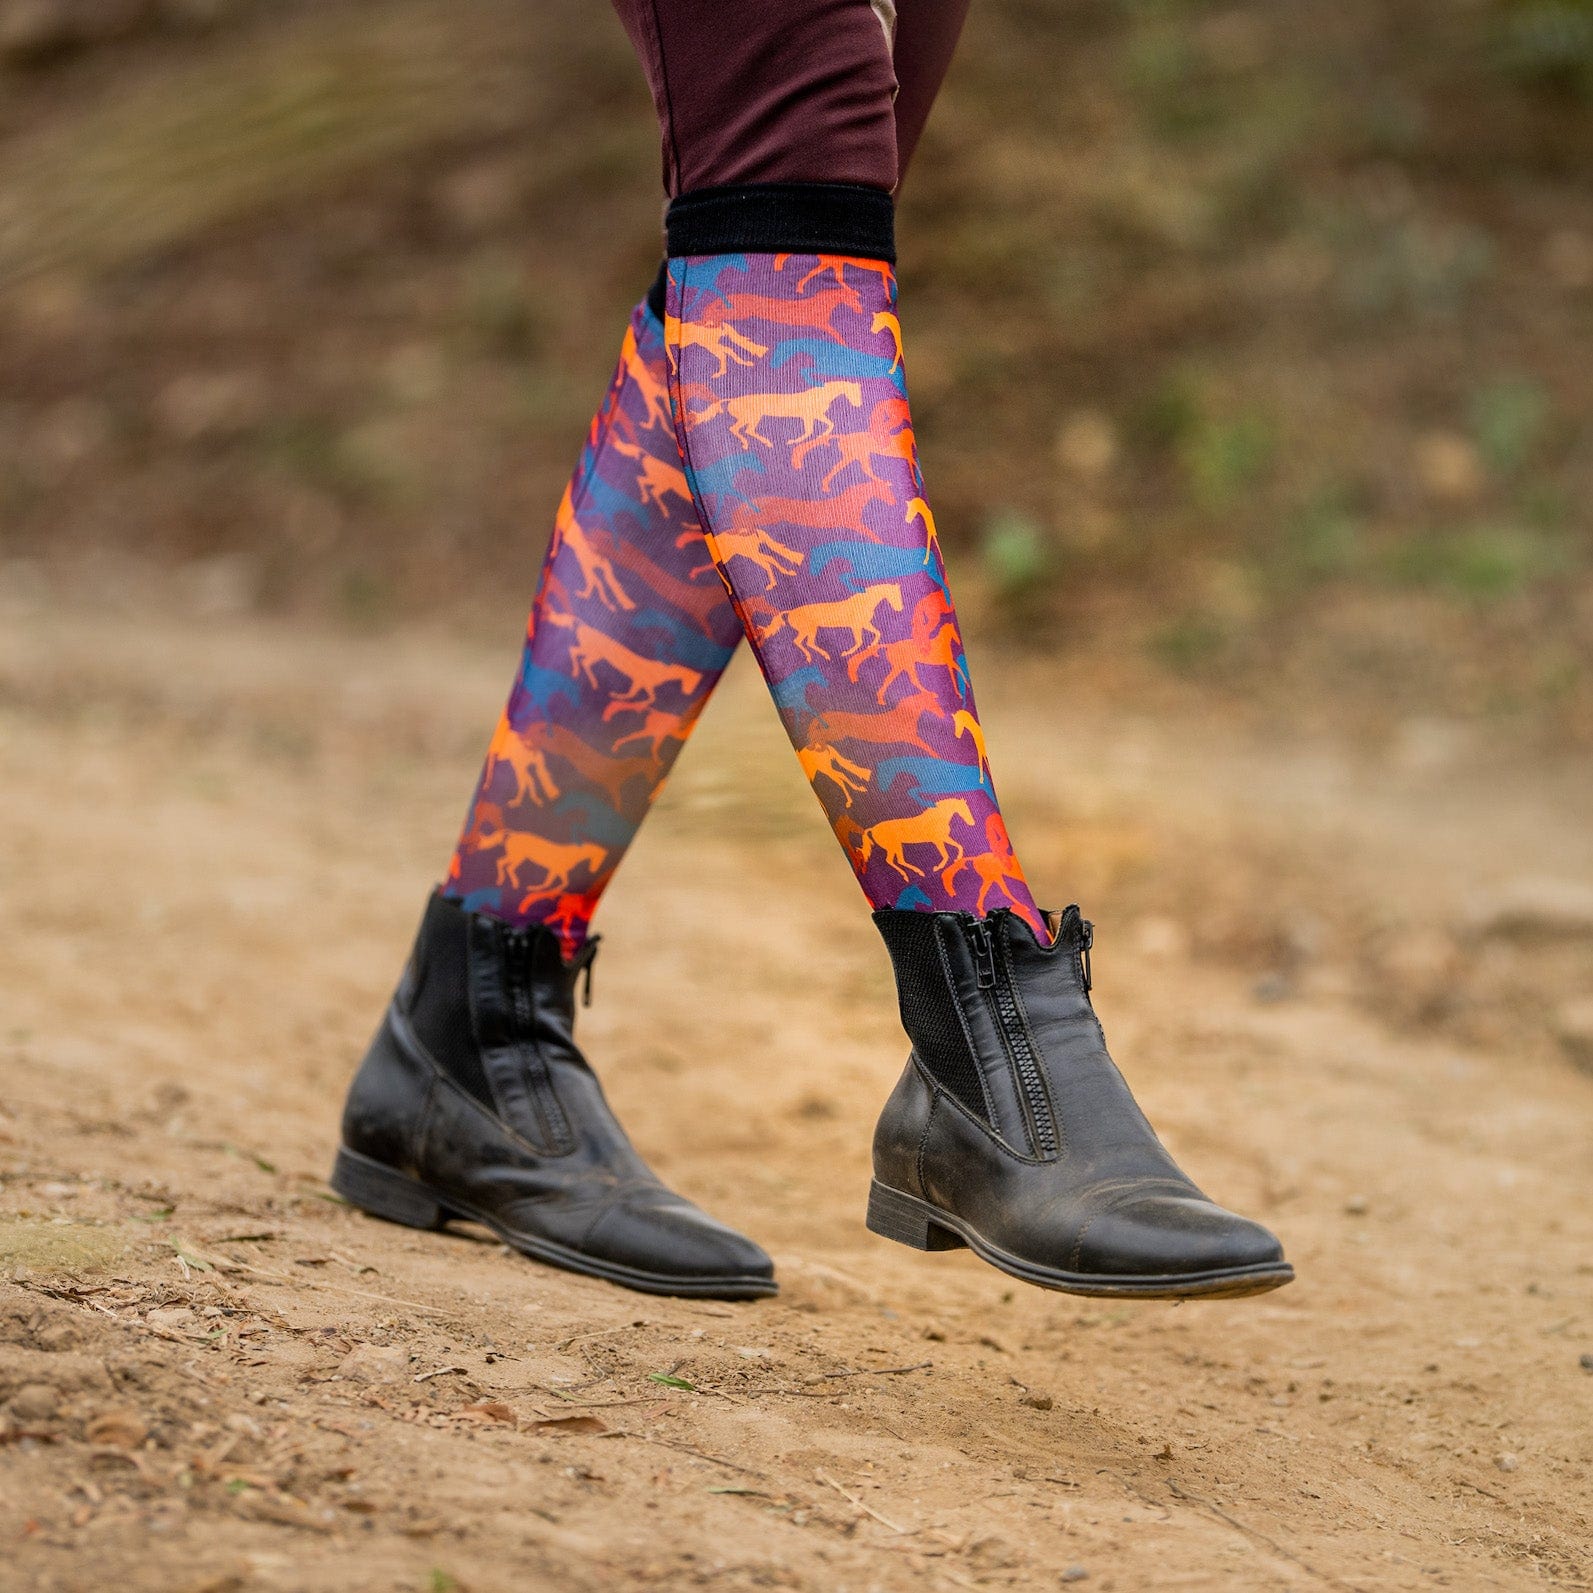 Patterned Tights: Funky, Fashionable & Fun